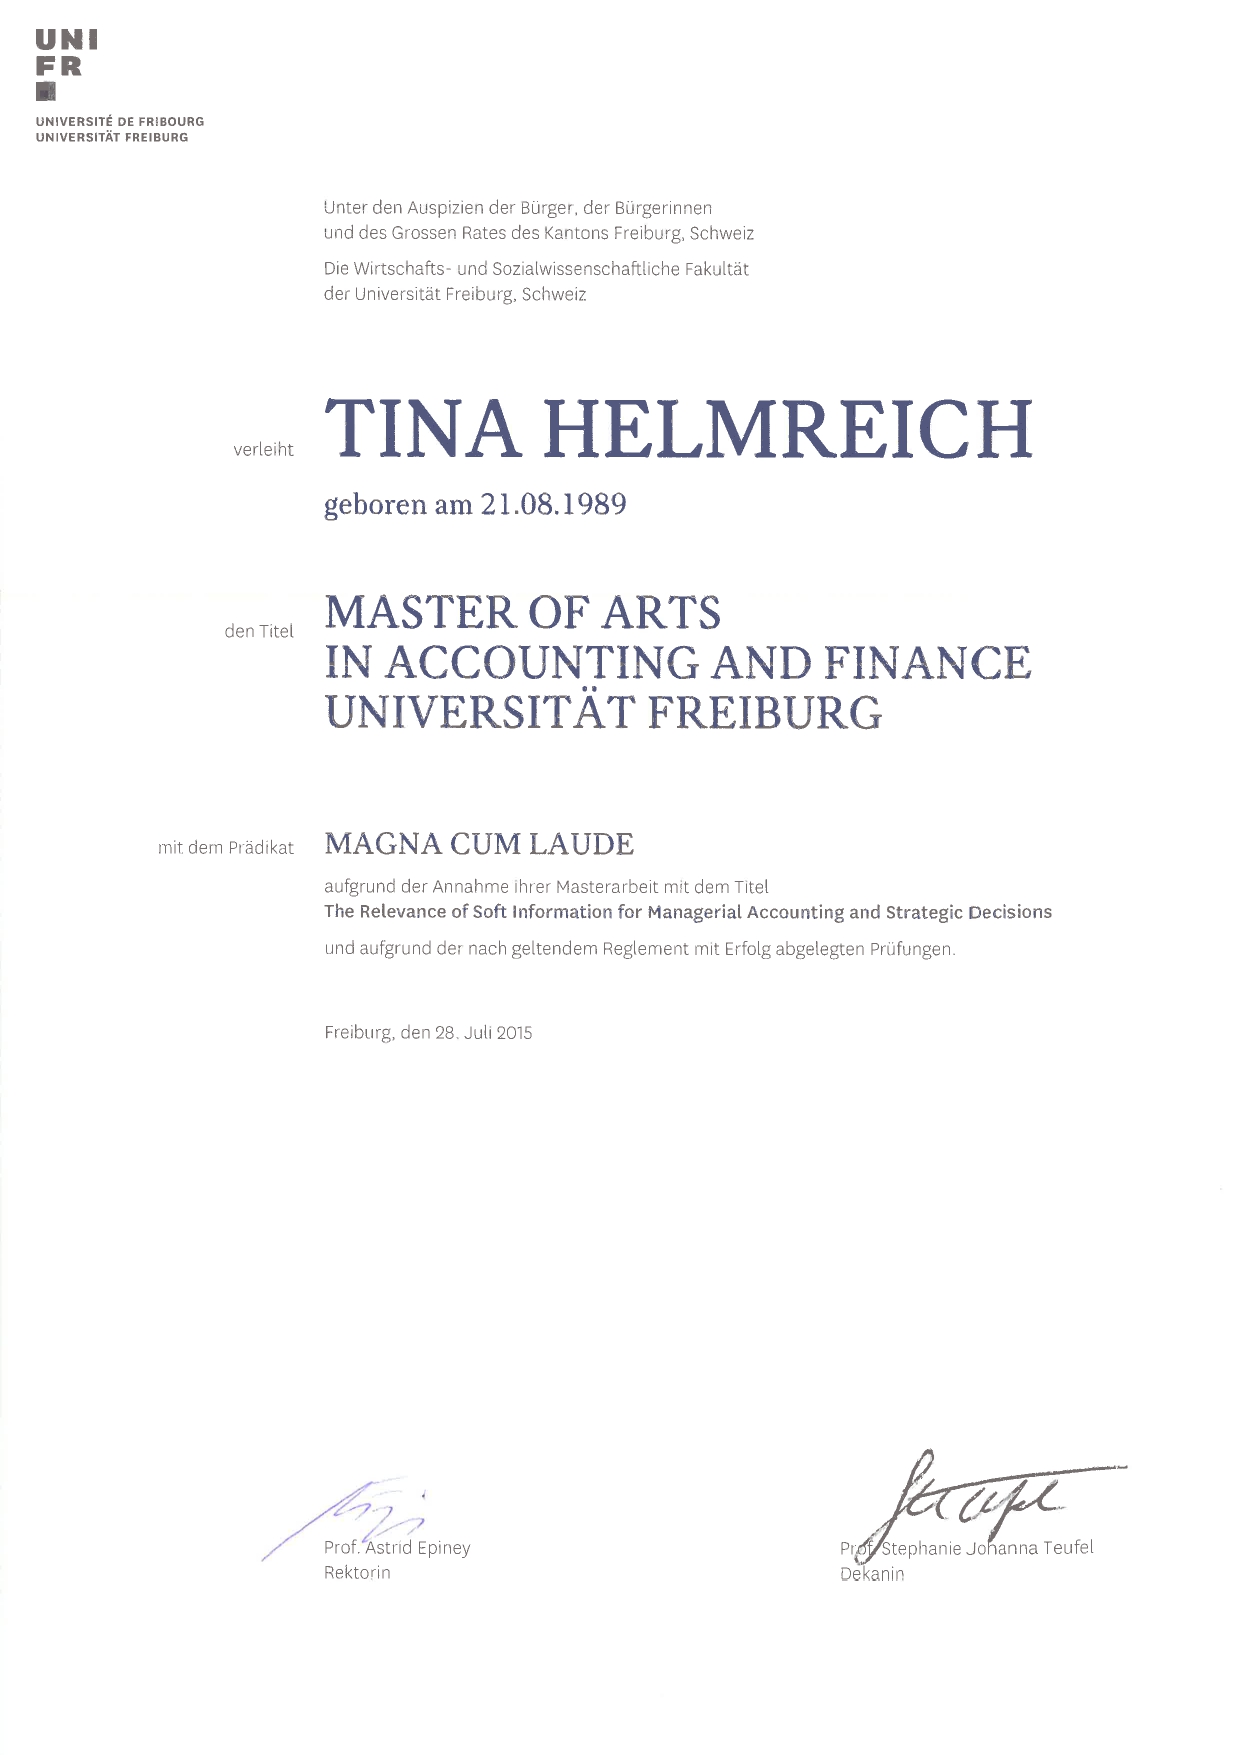 Master in Accounting & Finance Certificate Tina Helmreich